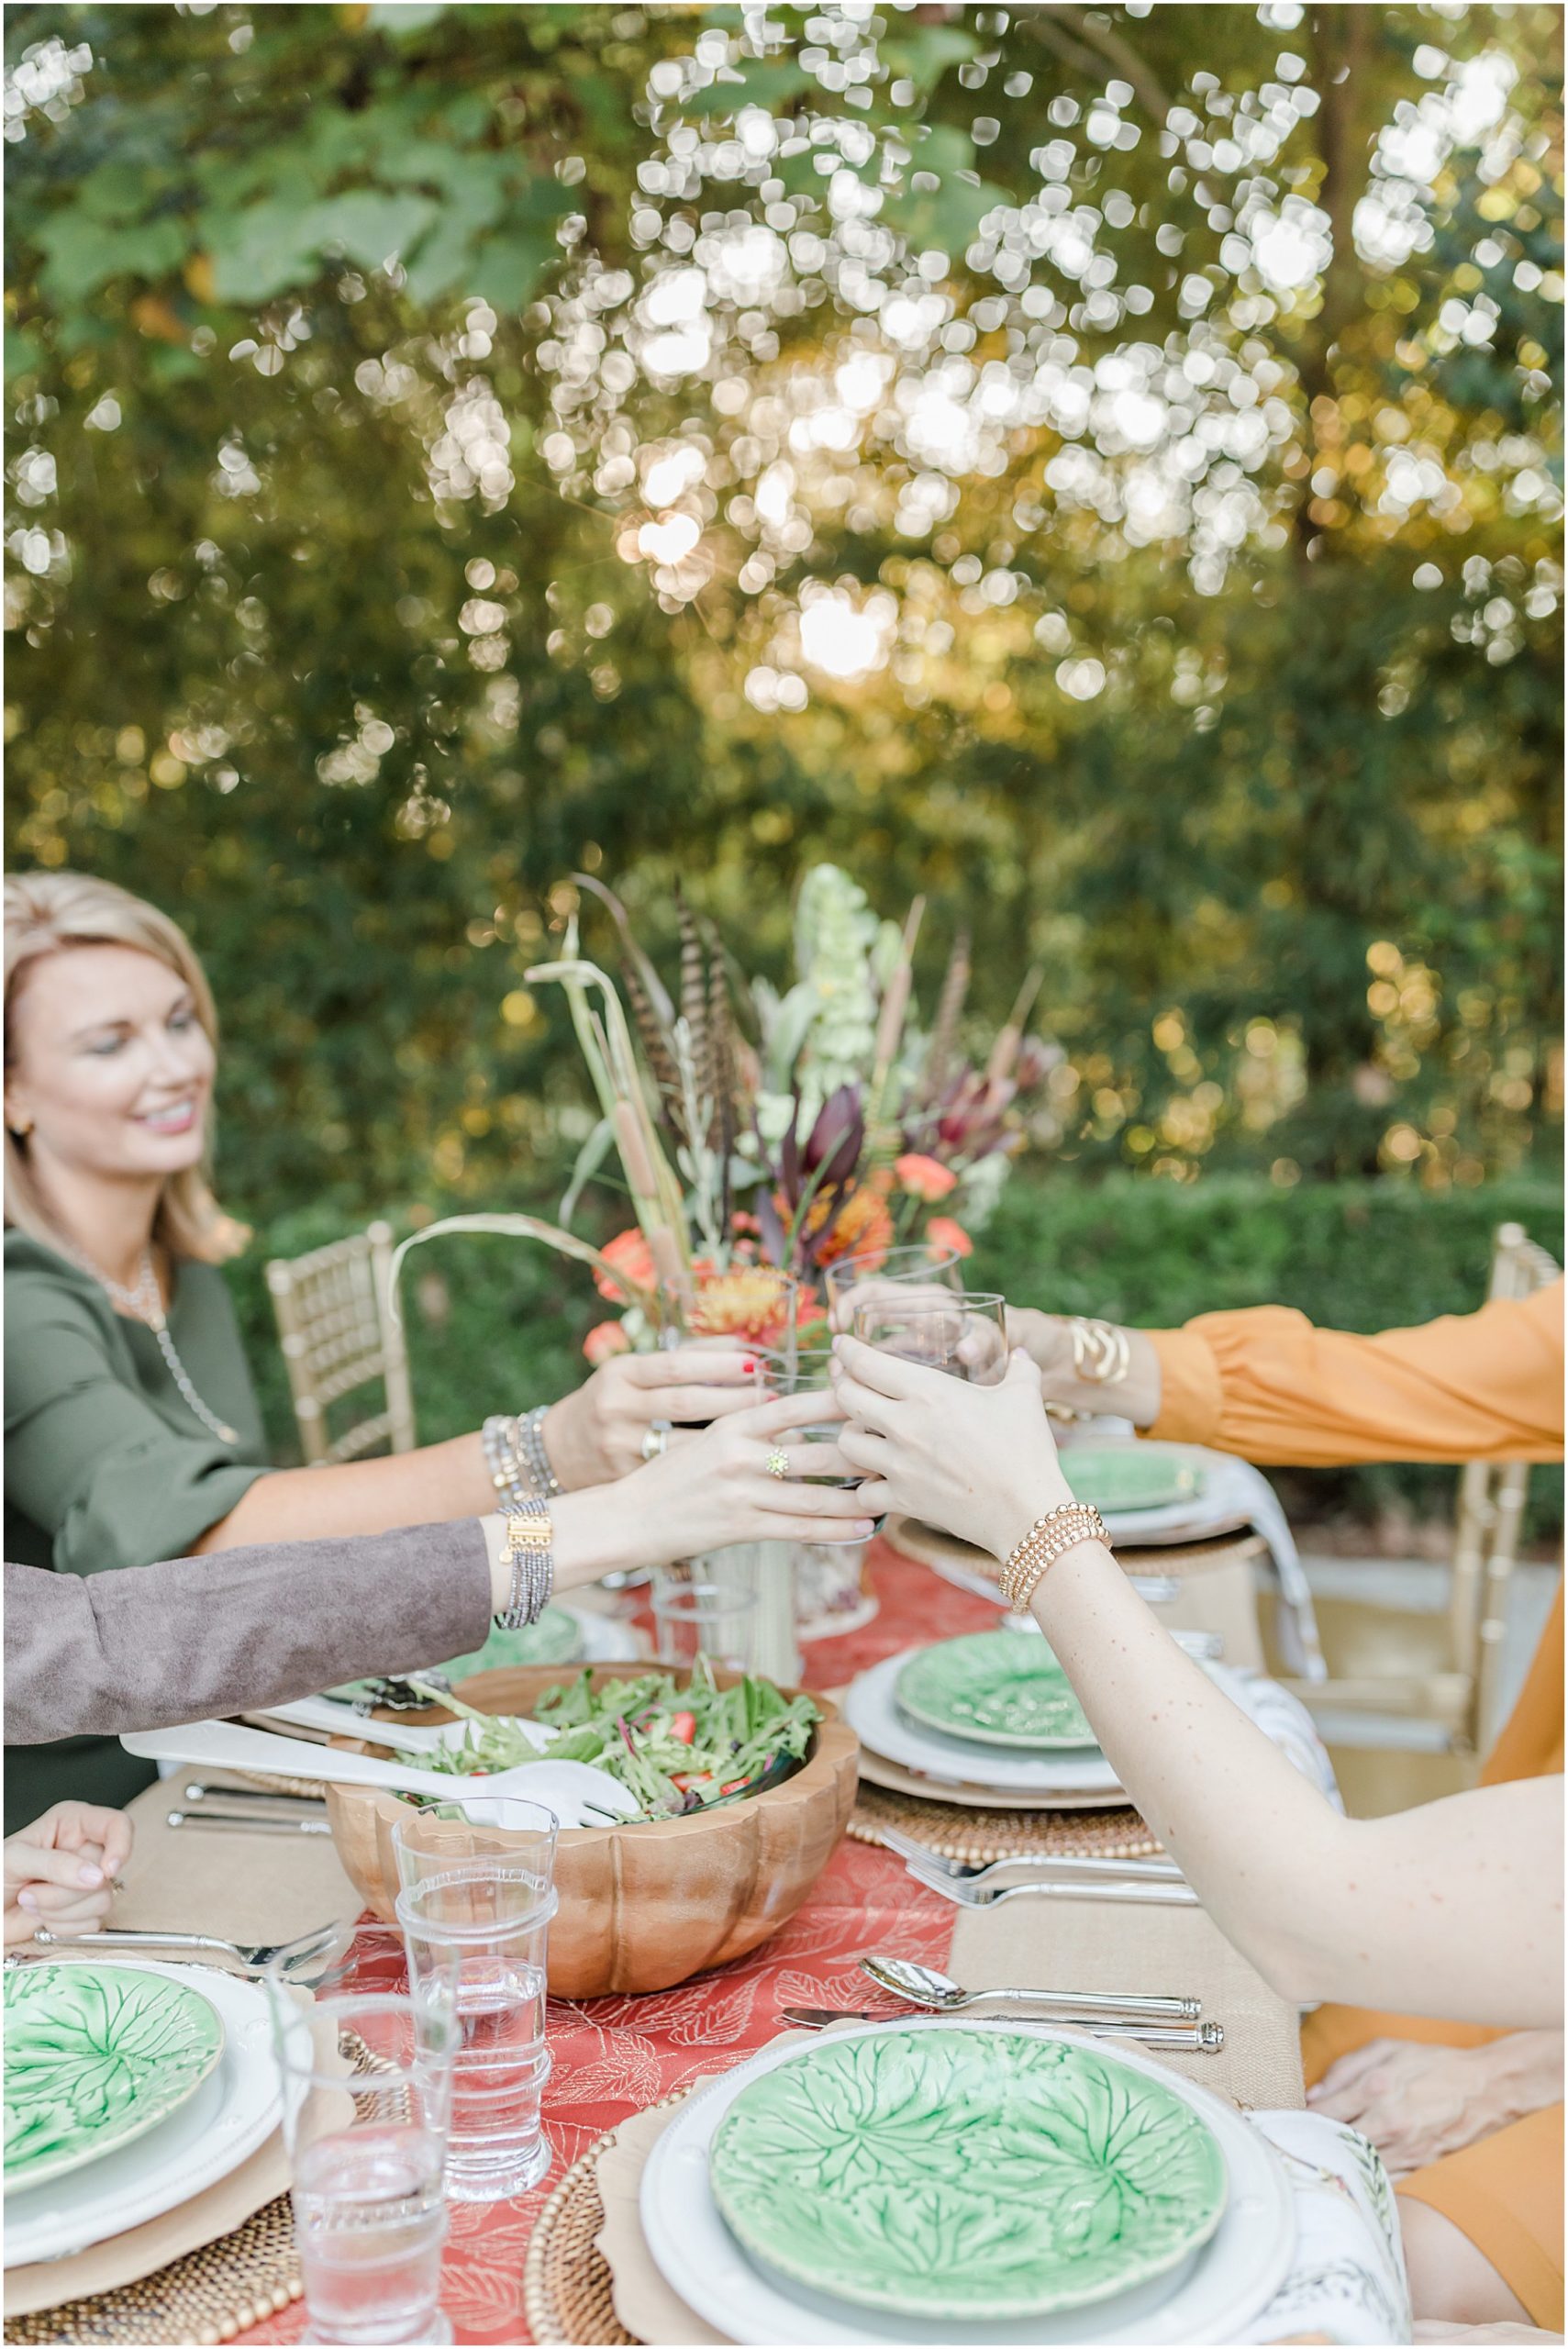 The hands of four women extending over a fall tabletop to cheers the meal.